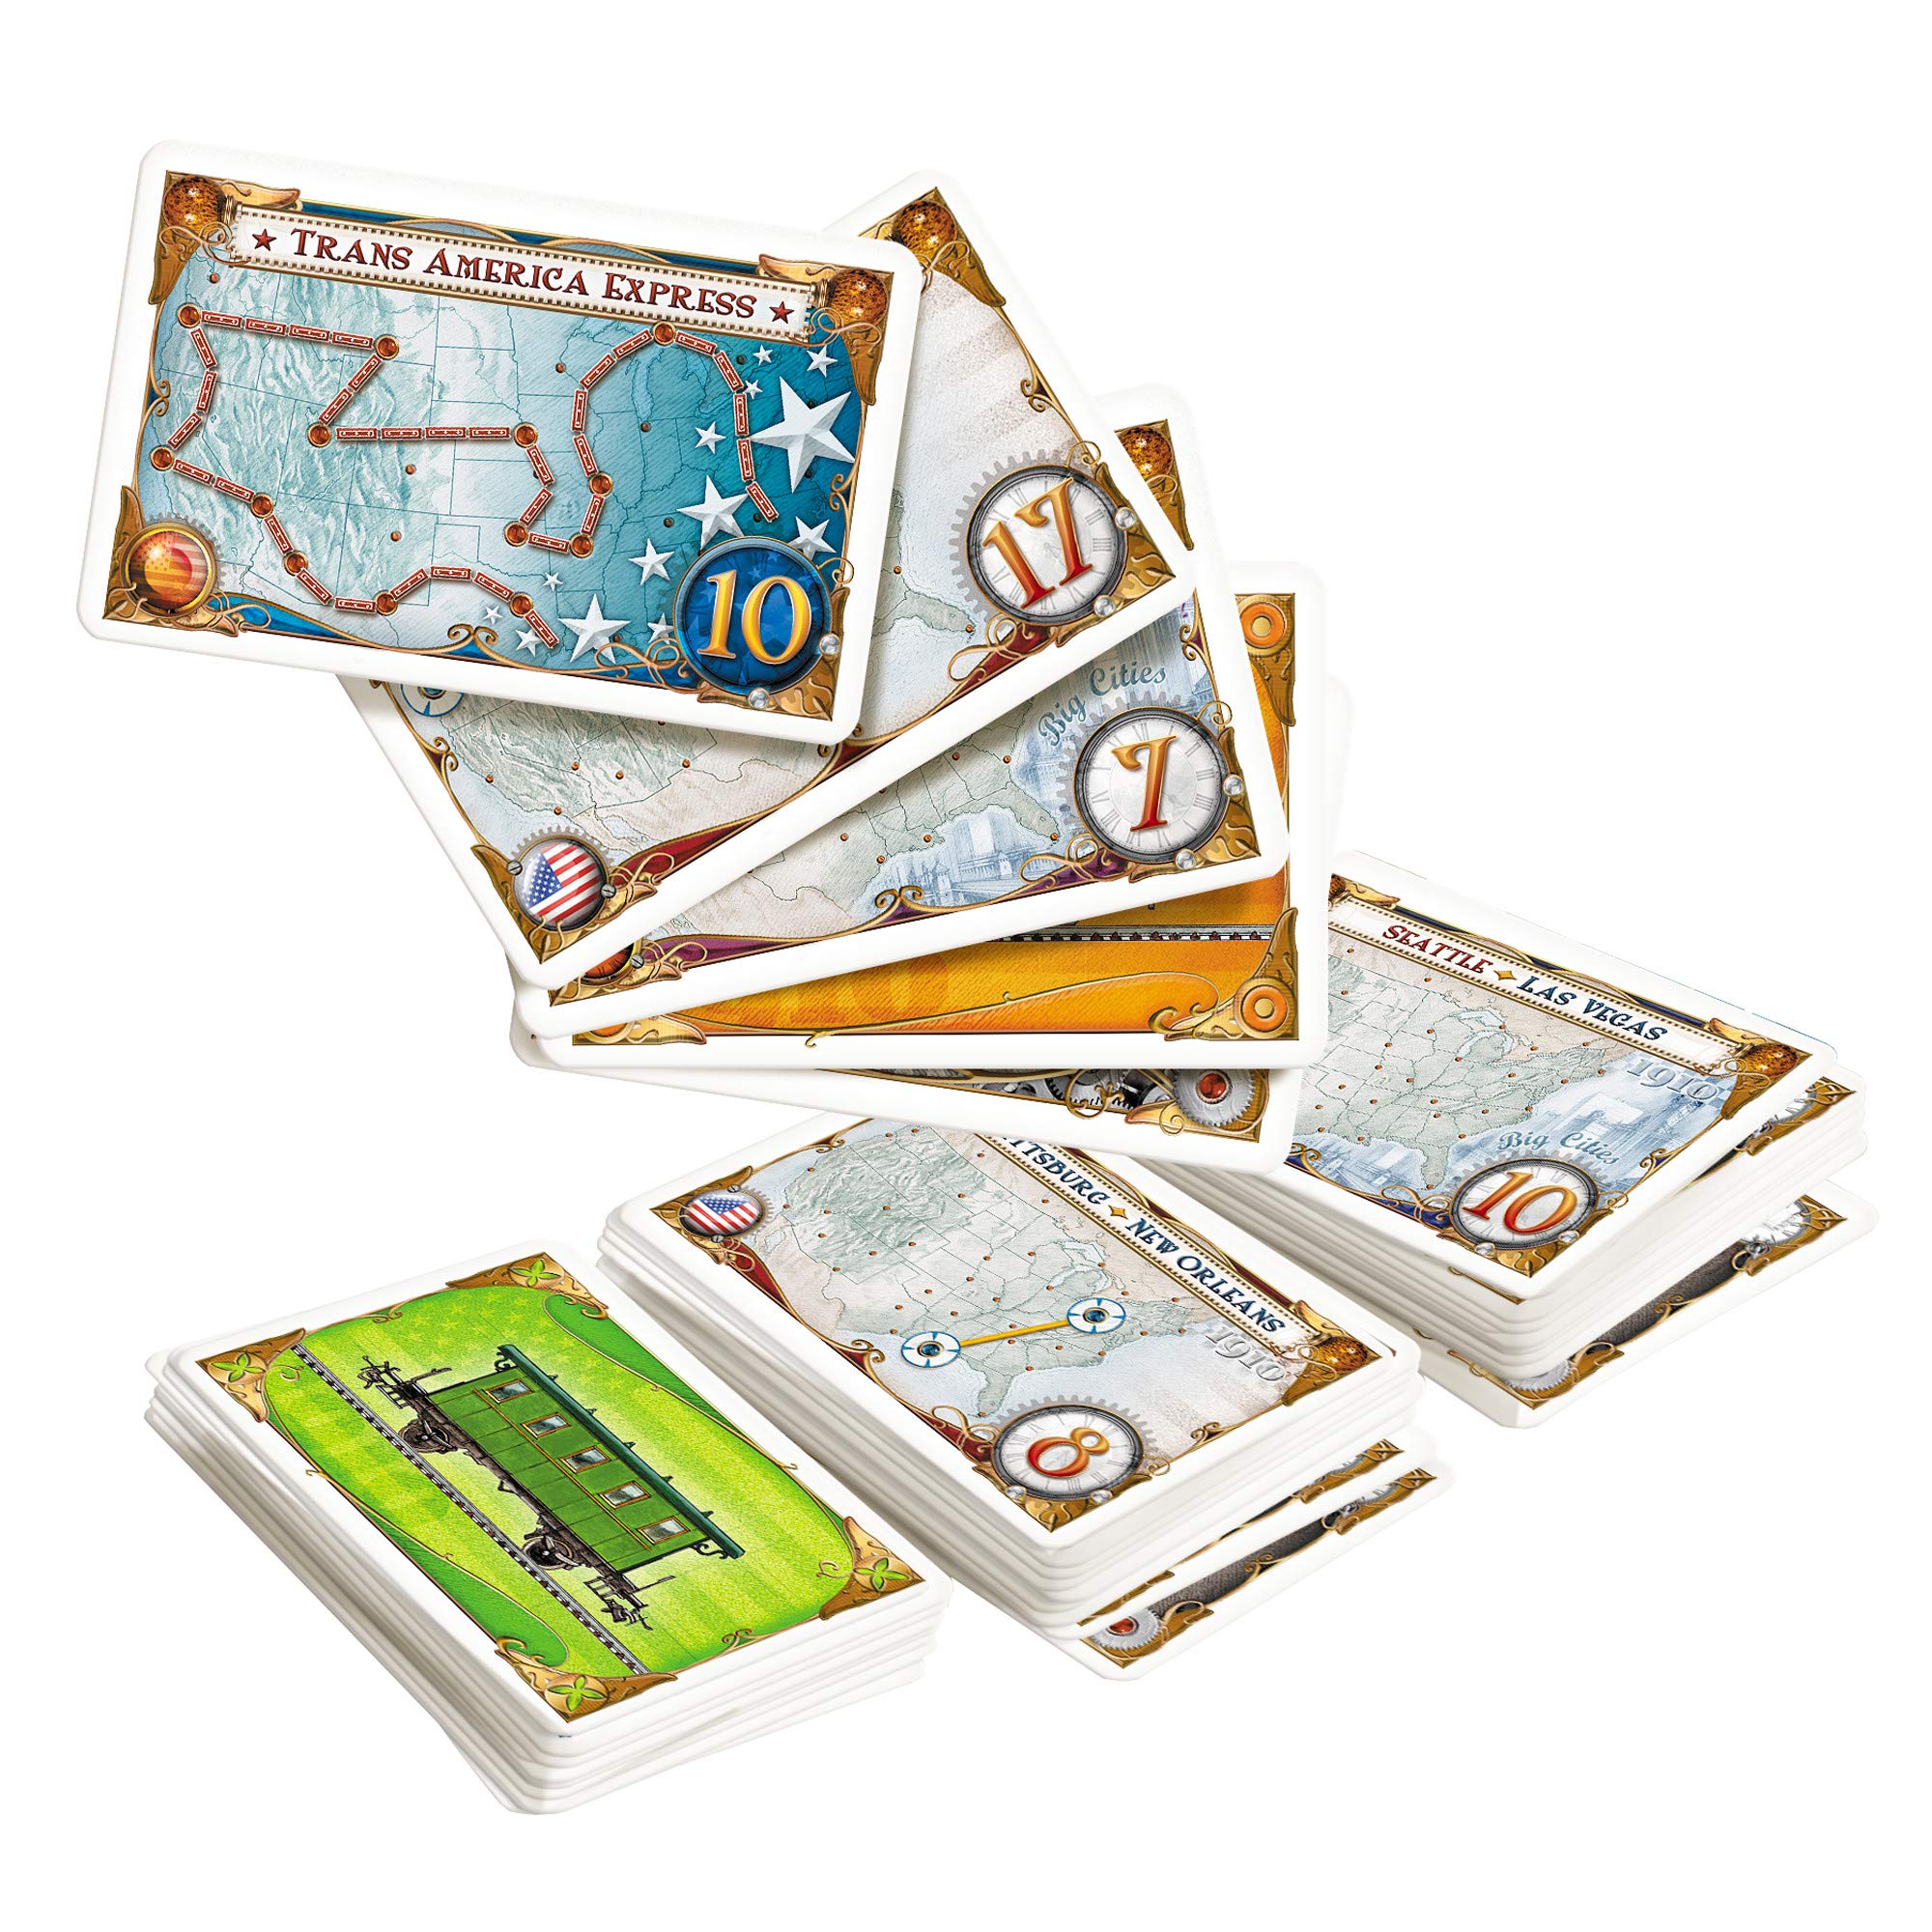 Ticket to Ride USA 1910 Board Game EXPANSION | Train Route-Building Strategy Game | Fun Family Game for Kids and Adults | Ages 8+ | 2-5 Players | Avg. Playtime 30-60 Minutes | Made by Days of Wonder